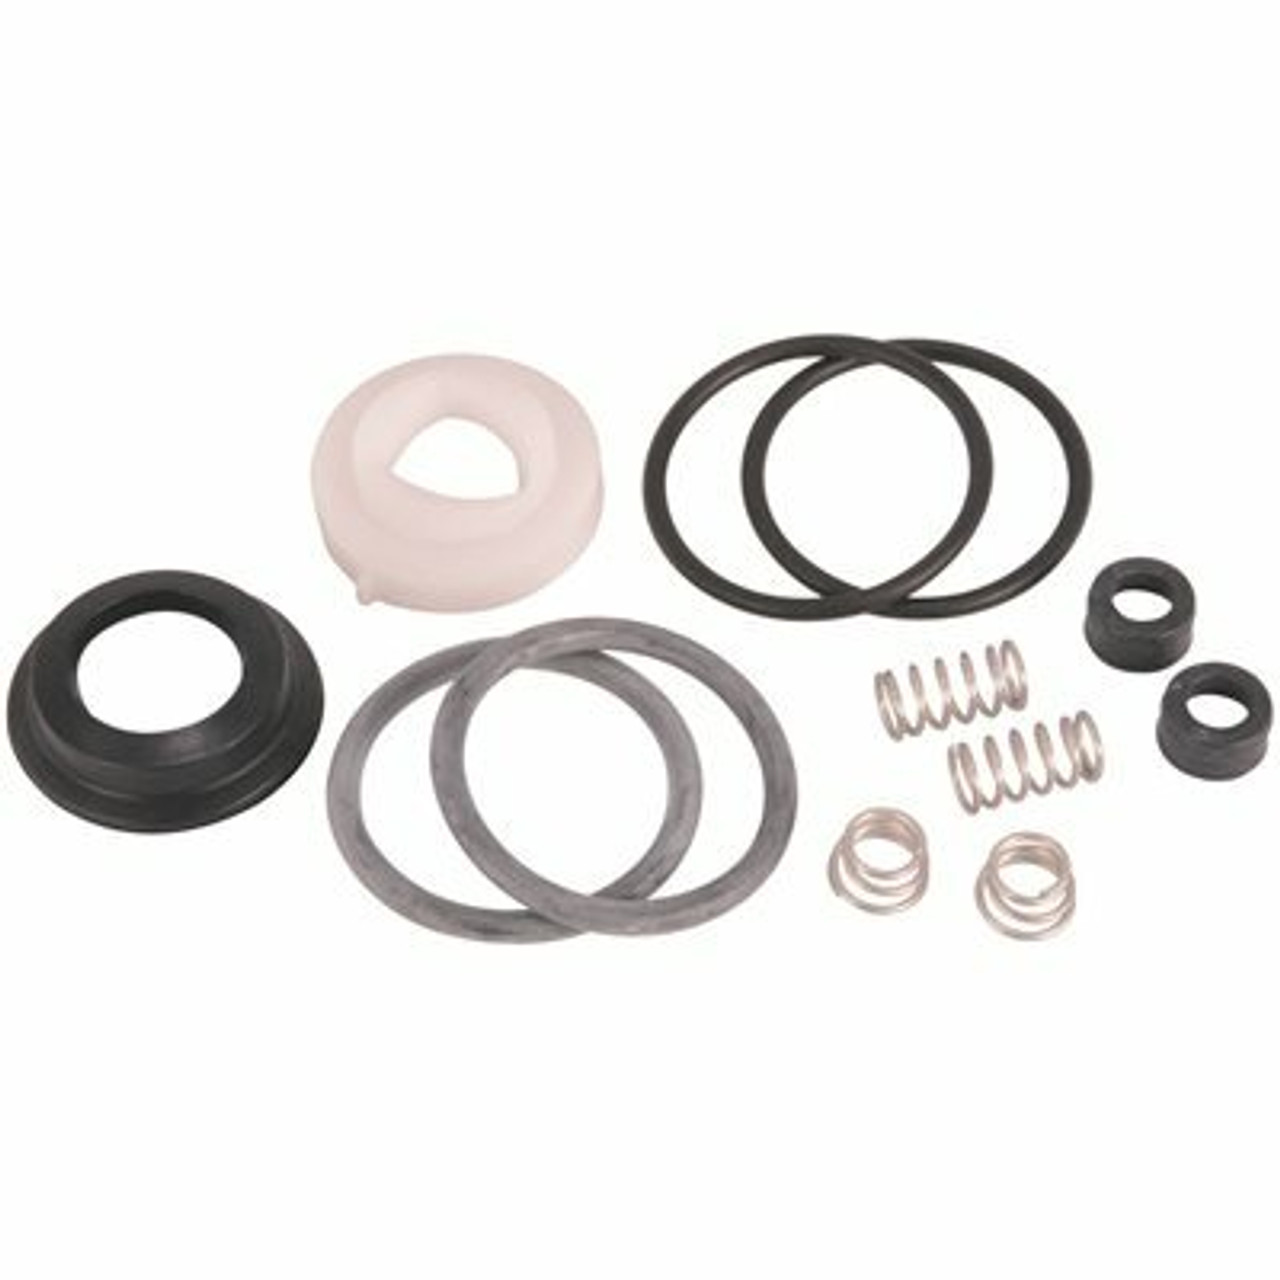 Brasscraft Repair Kit For Delta Crystal Knob Handle Single-Lever Faucets - 133465